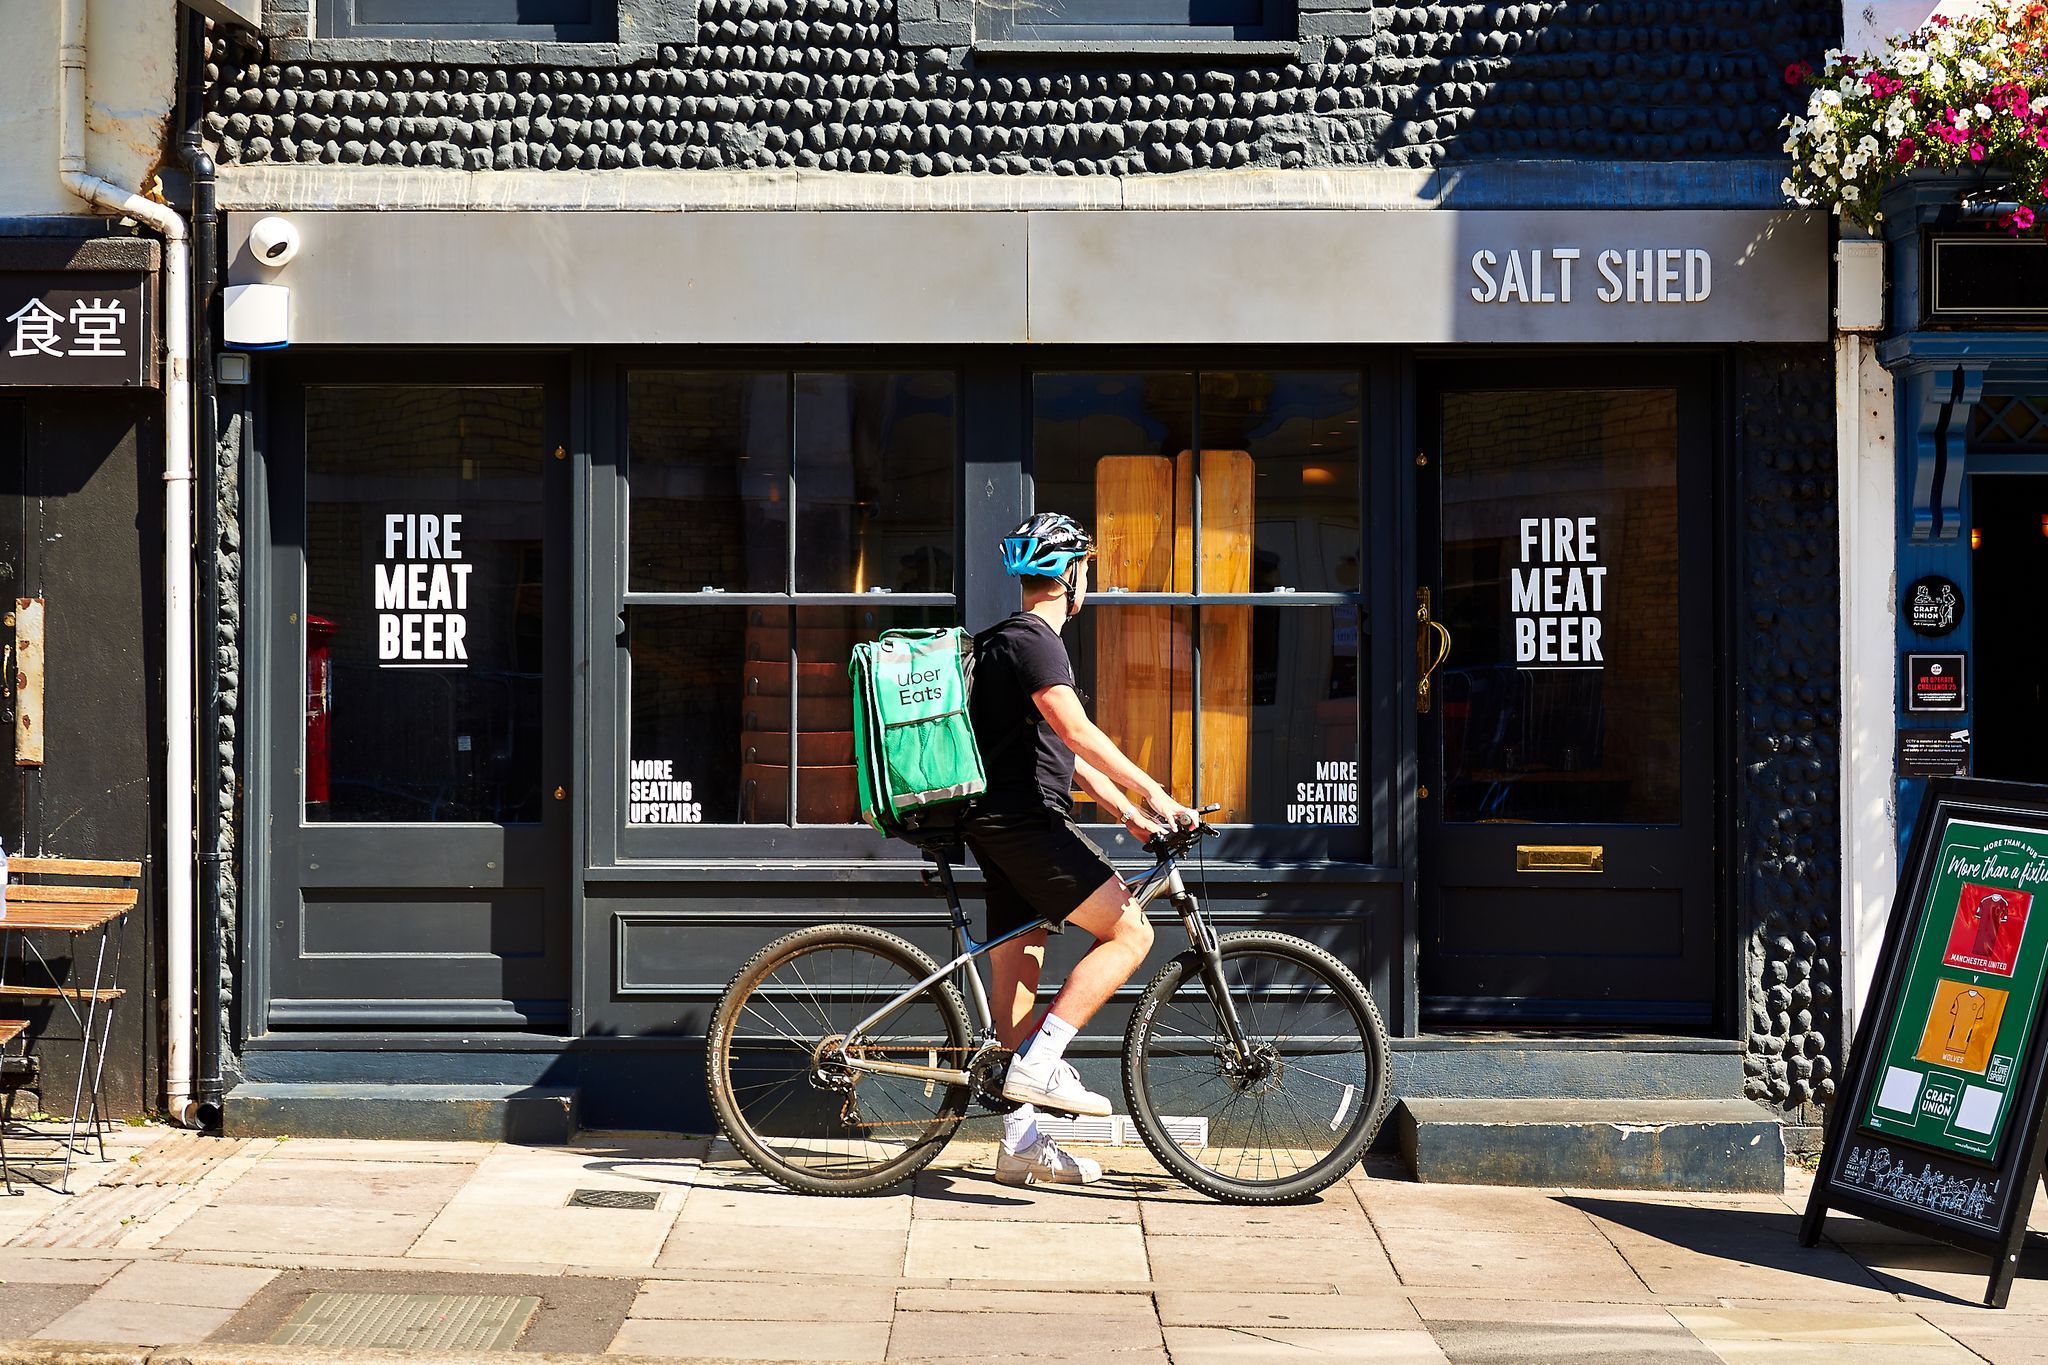 Uber Delivery person on the bike waiting with the uber eats bag in front of the salt shed